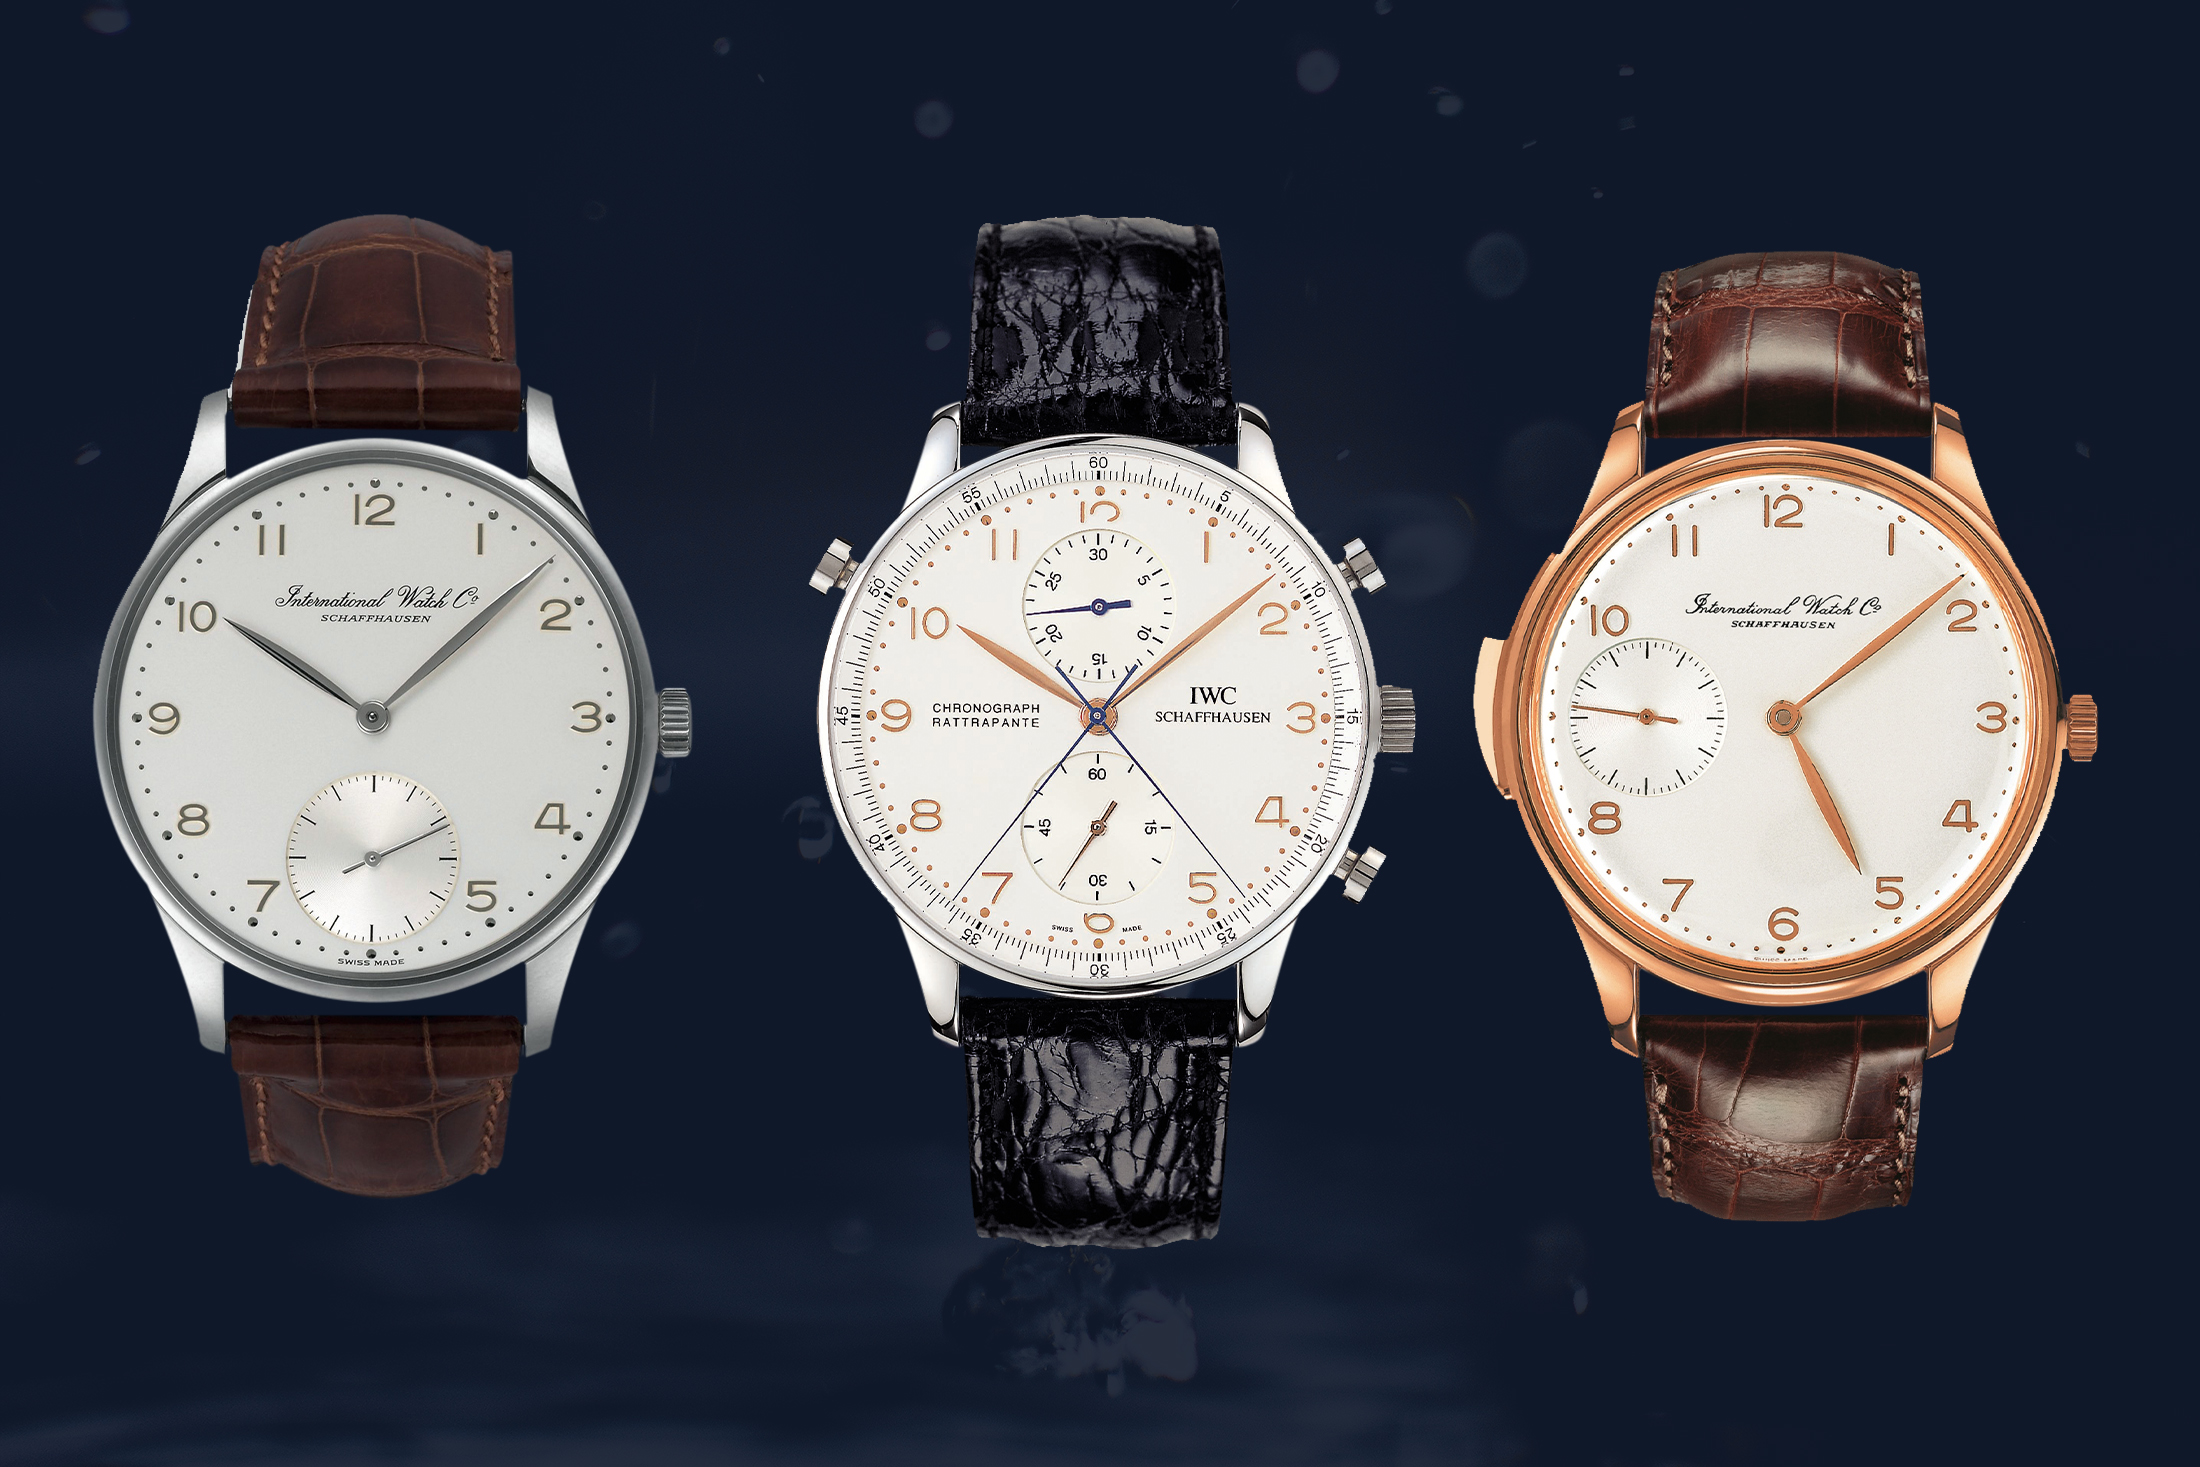 IWC Portugieser: An Endless Sea of Dreams | Curatedition